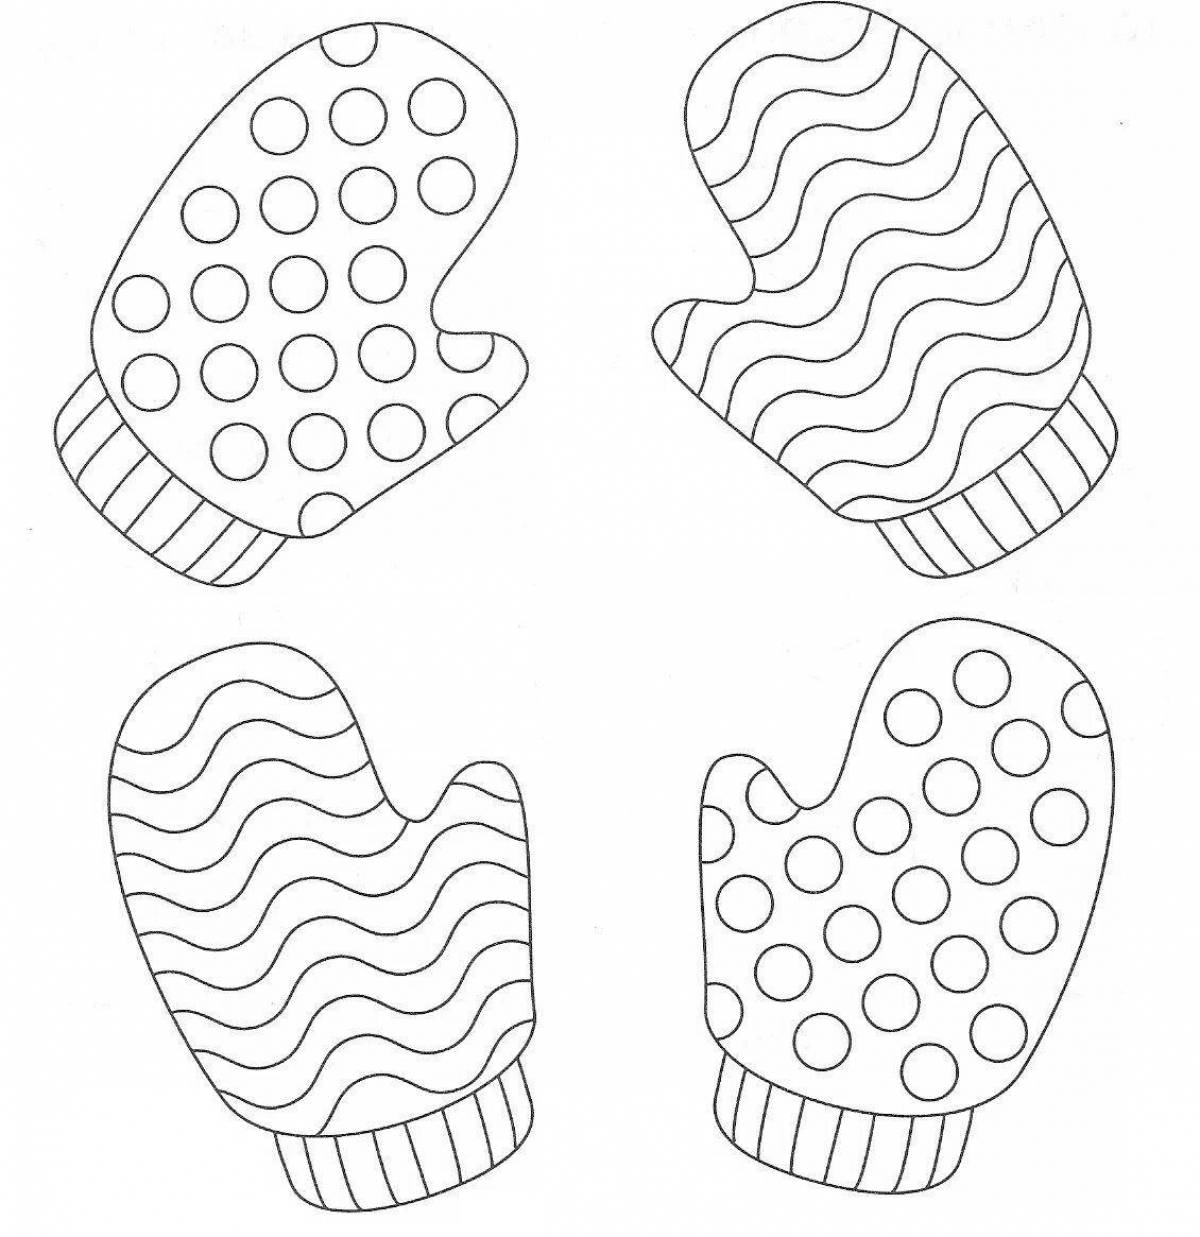 Coloring page adorable rubber mittens